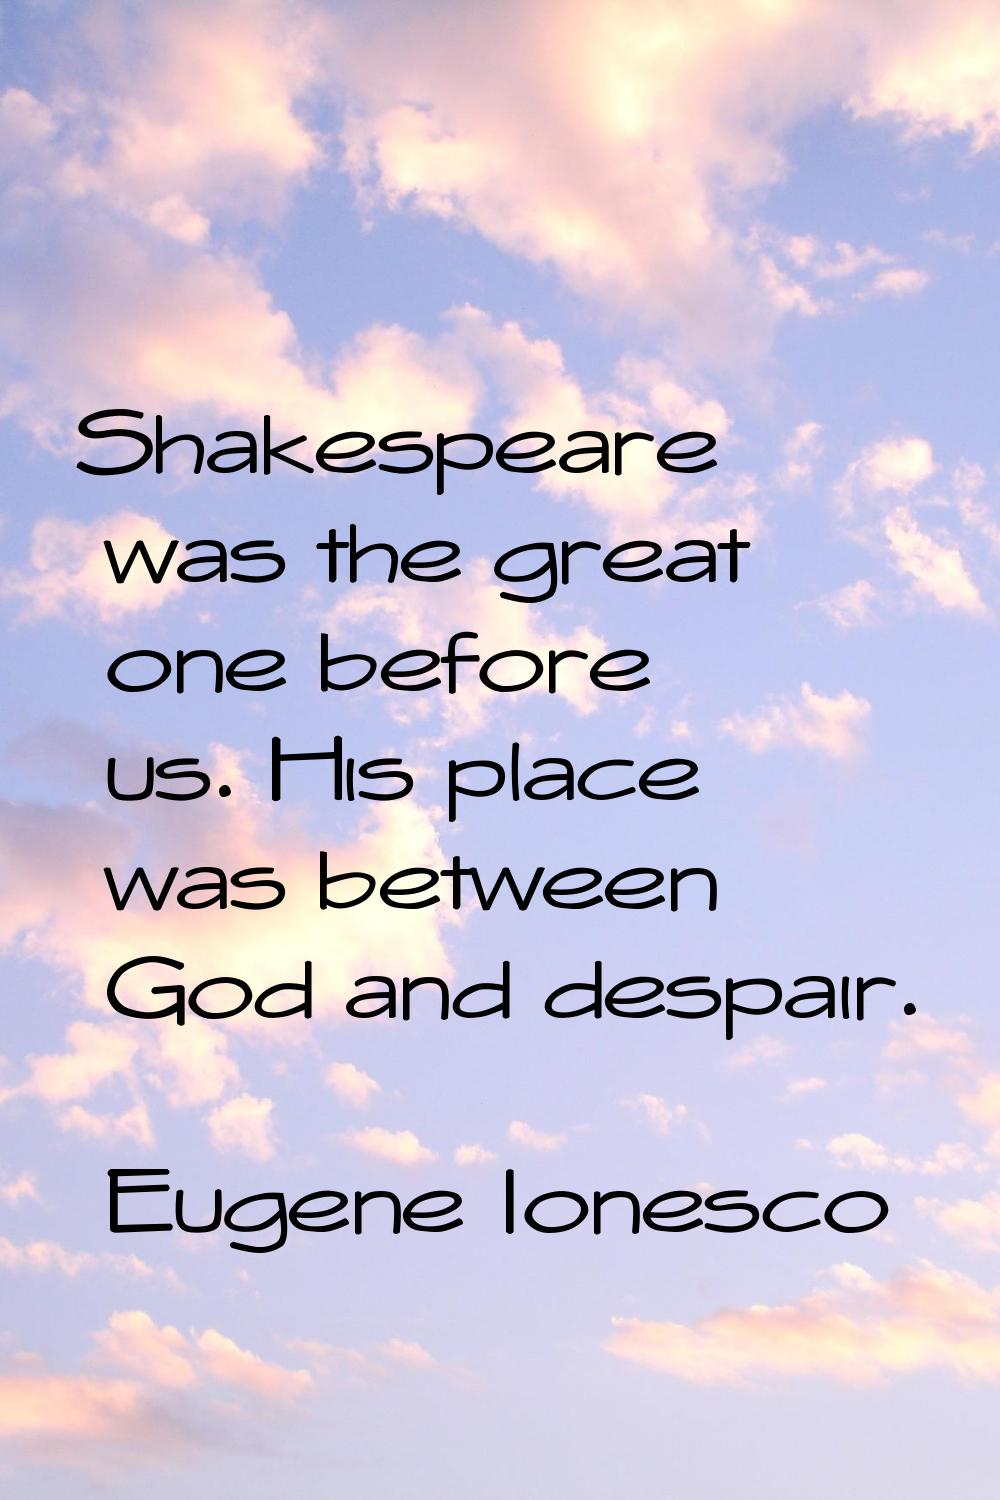 Shakespeare was the great one before us. His place was between God and despair.